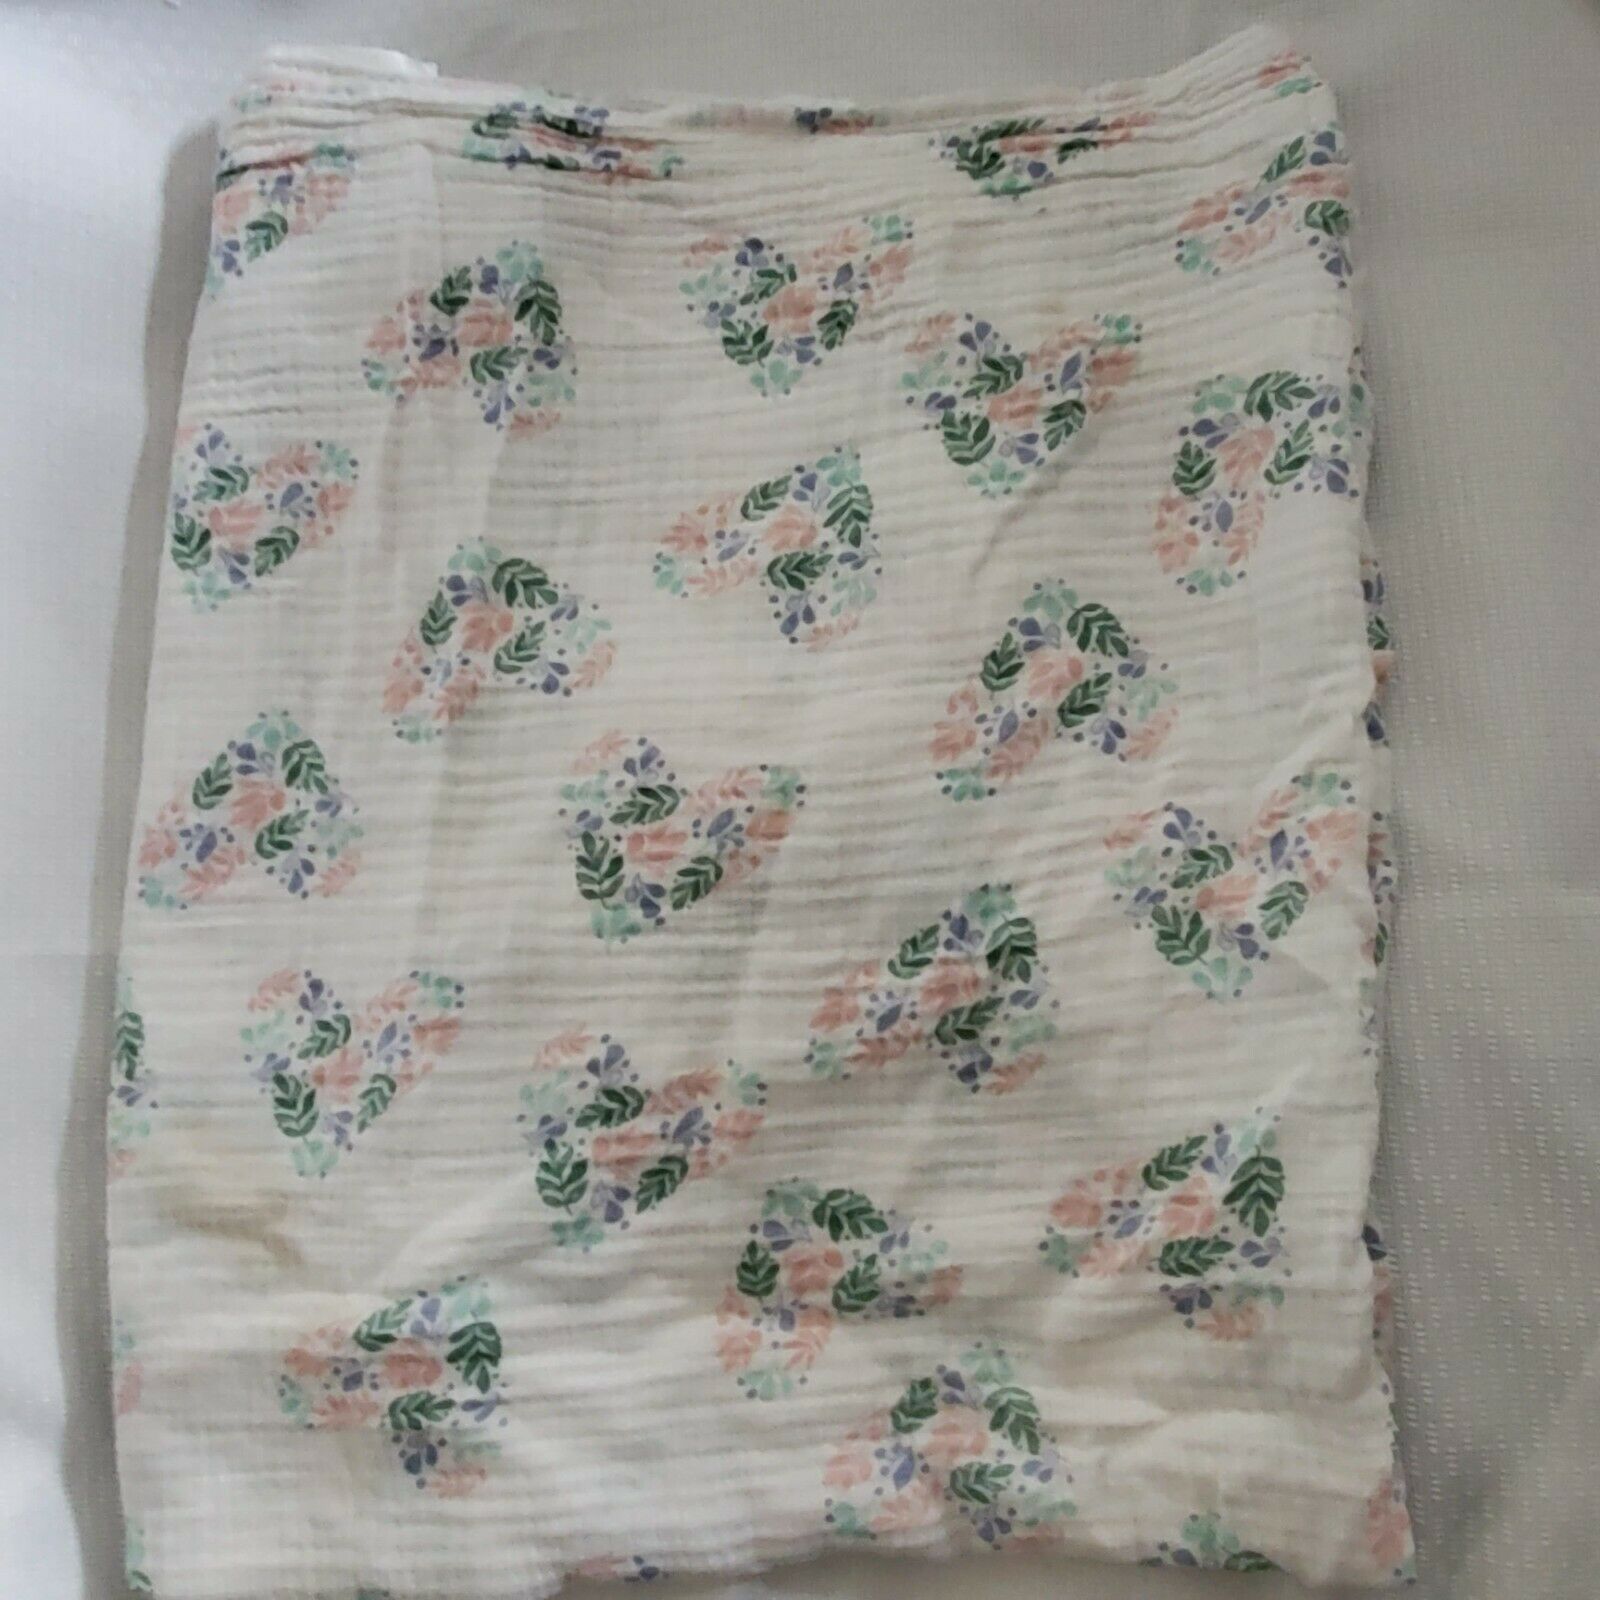 Primary image for Aden & Anais Heart Leaves Muslin Cotton Swaddle Blanket Baby Lovey Pink Blue